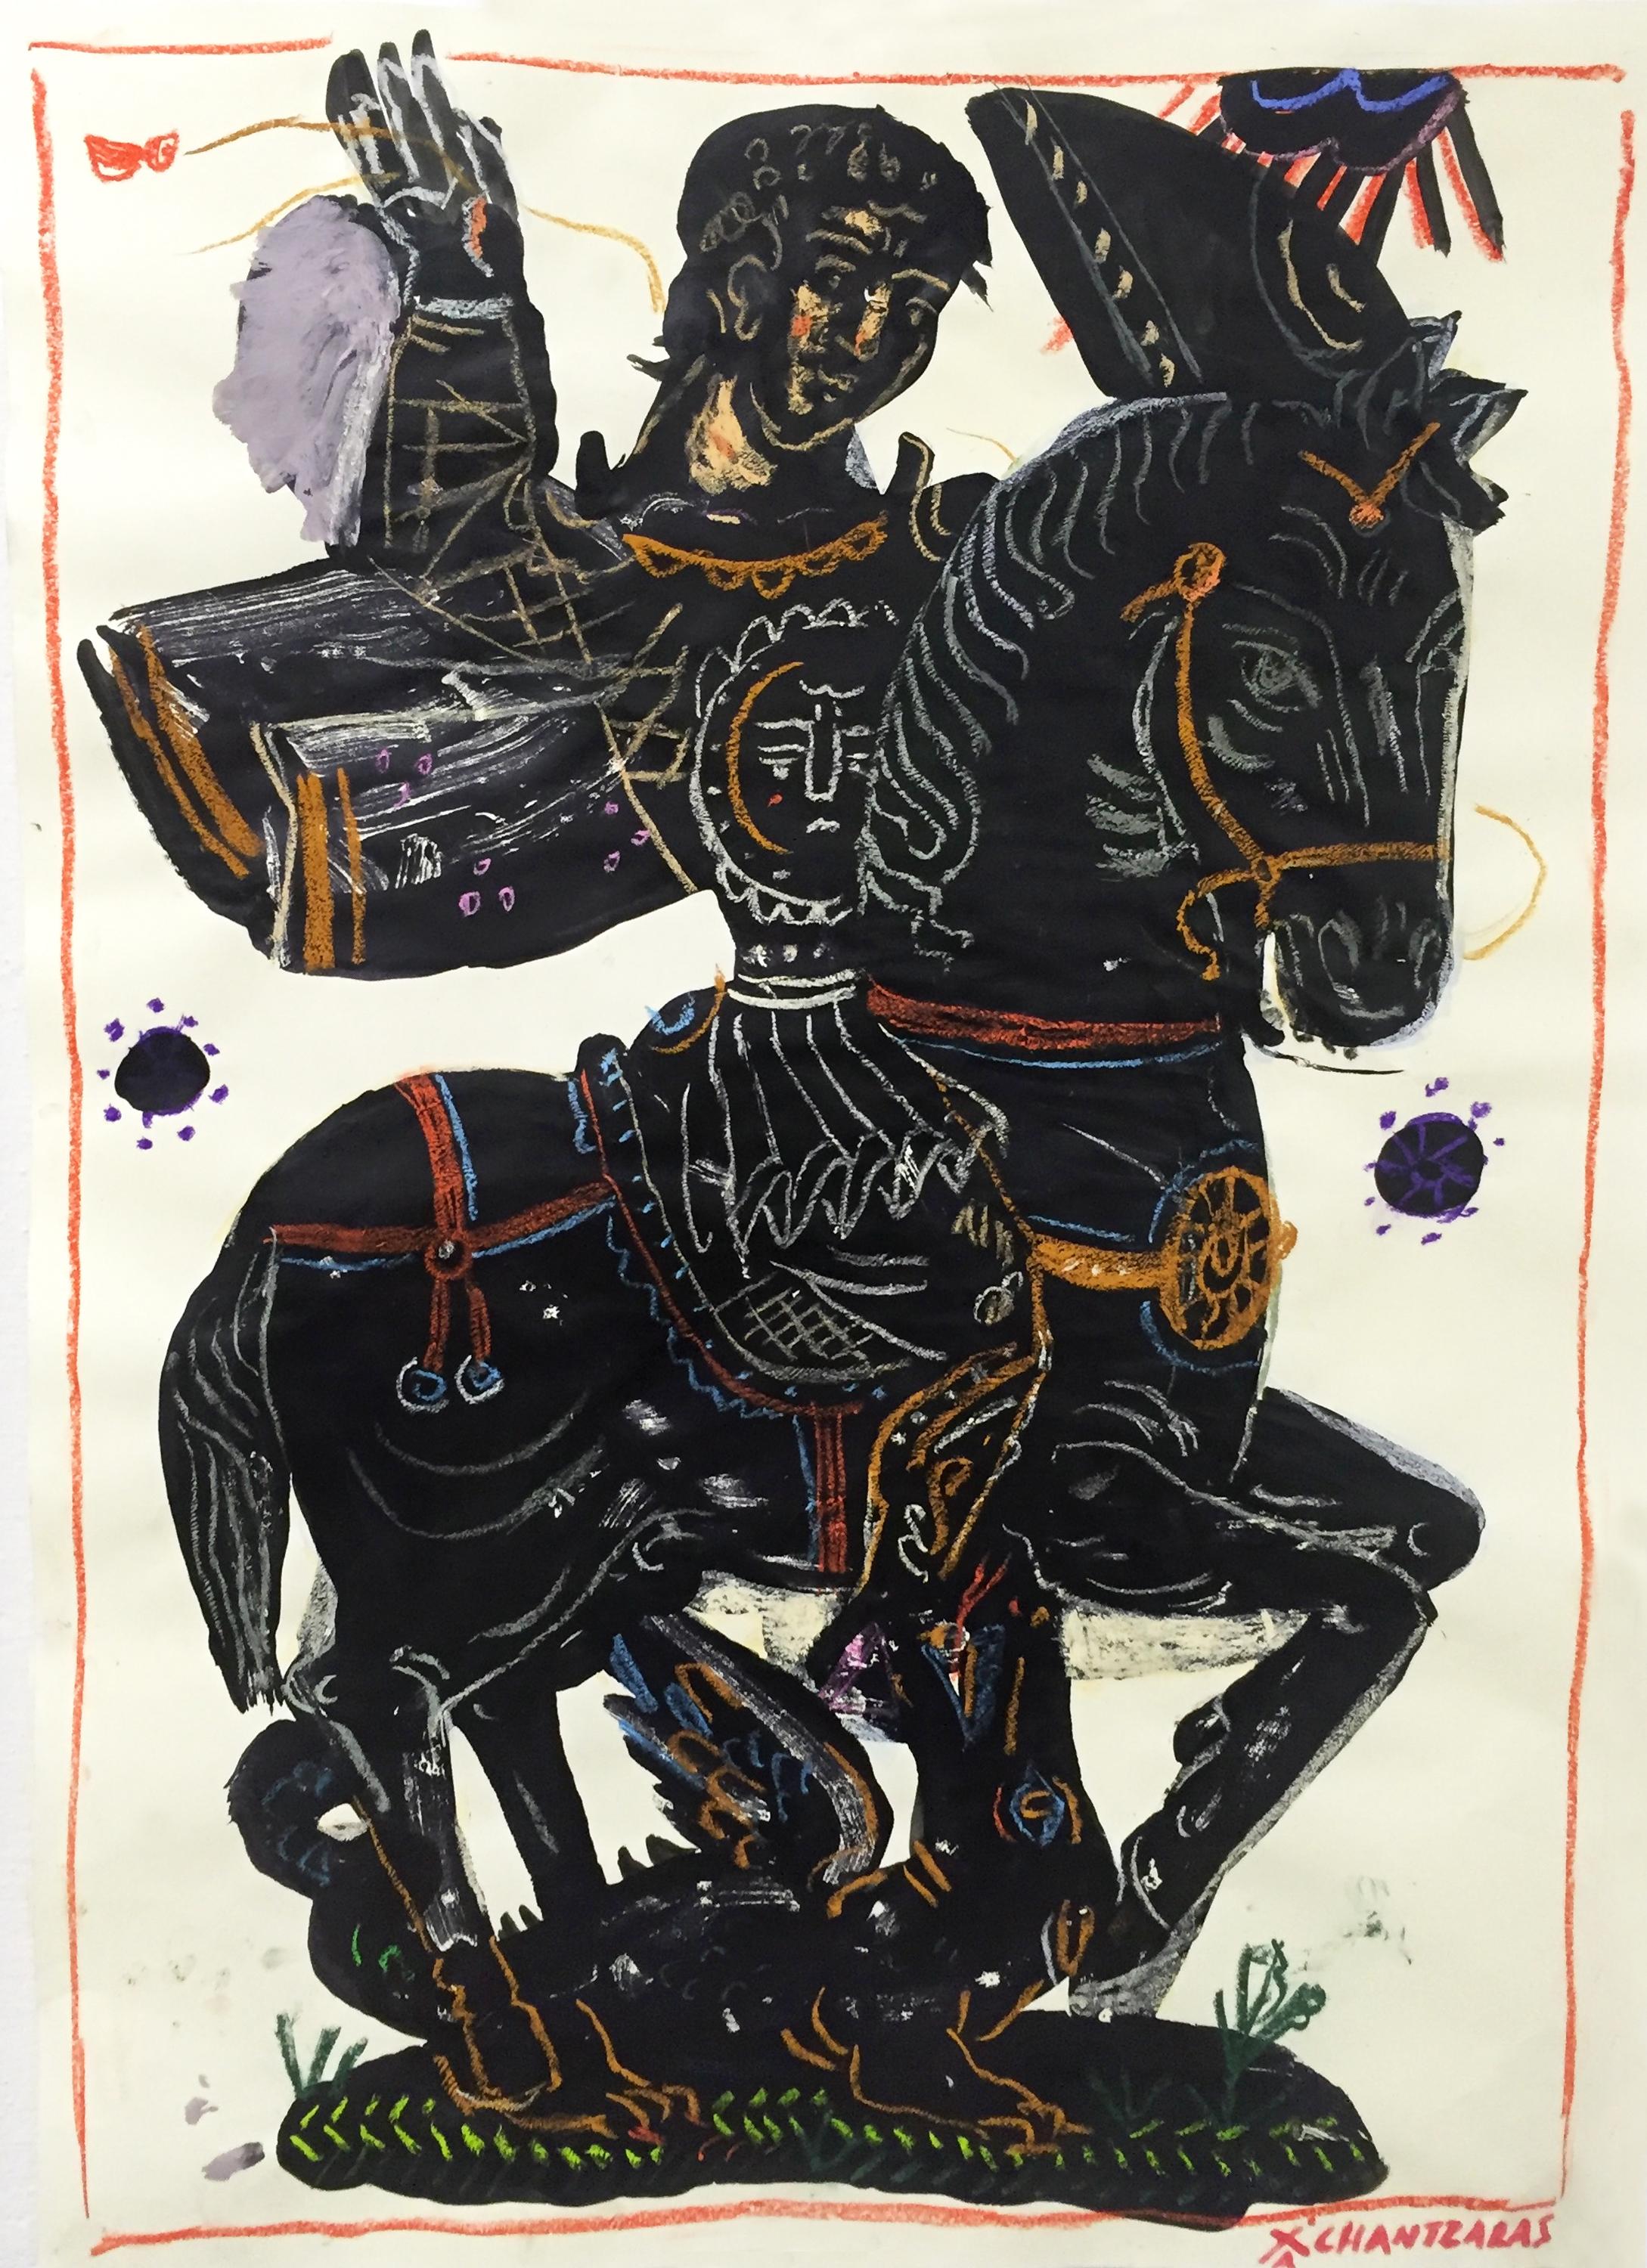 Imperial Rider, Contemporary and Bold Painting on paper, with Hero and Horse